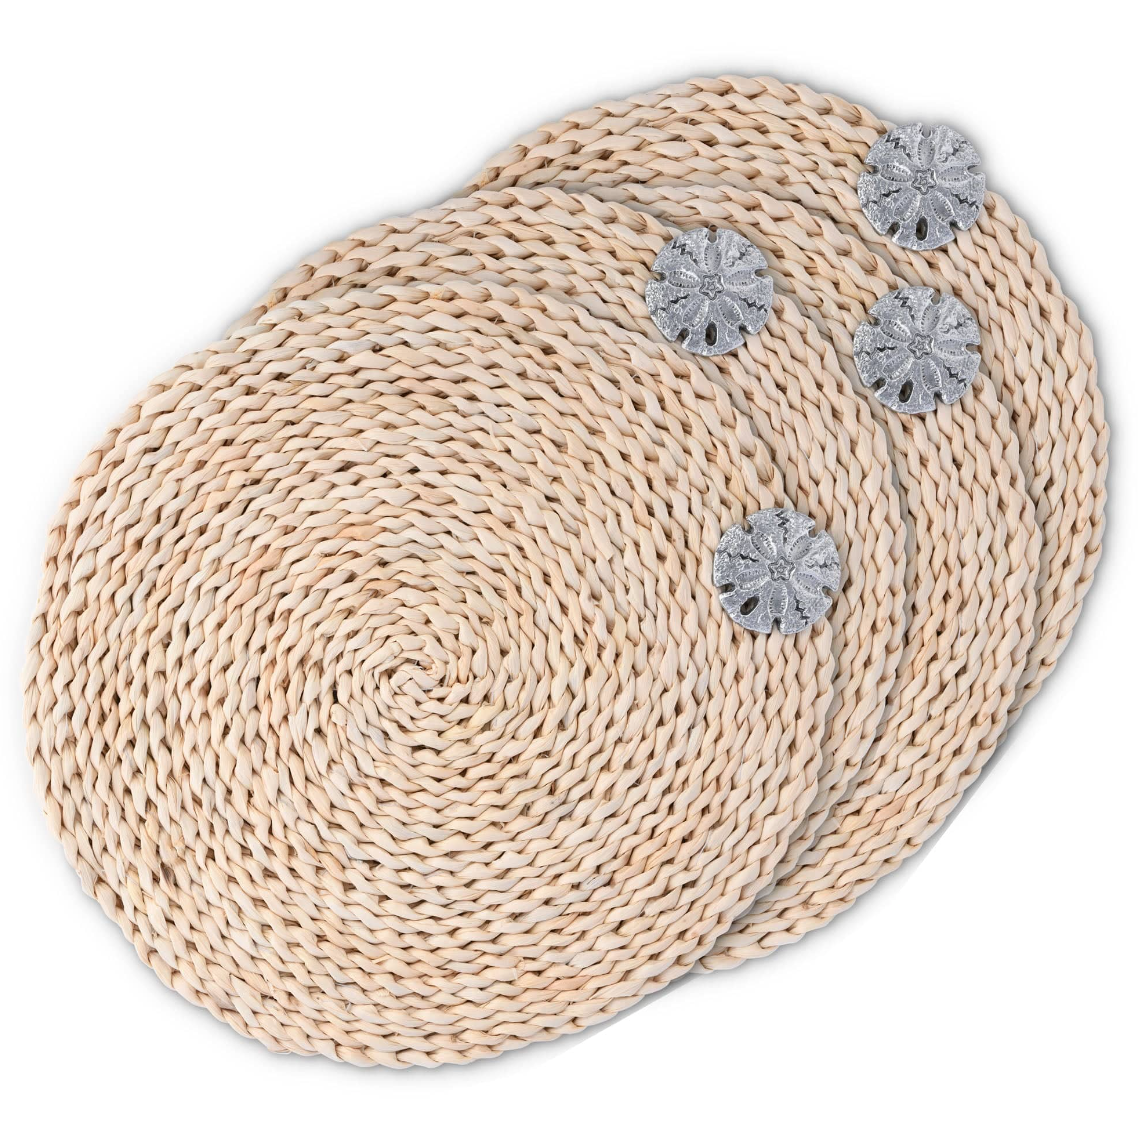 SAND DOLLAR TWISTED SEAGRASS PLACEMATS - SET OF 4